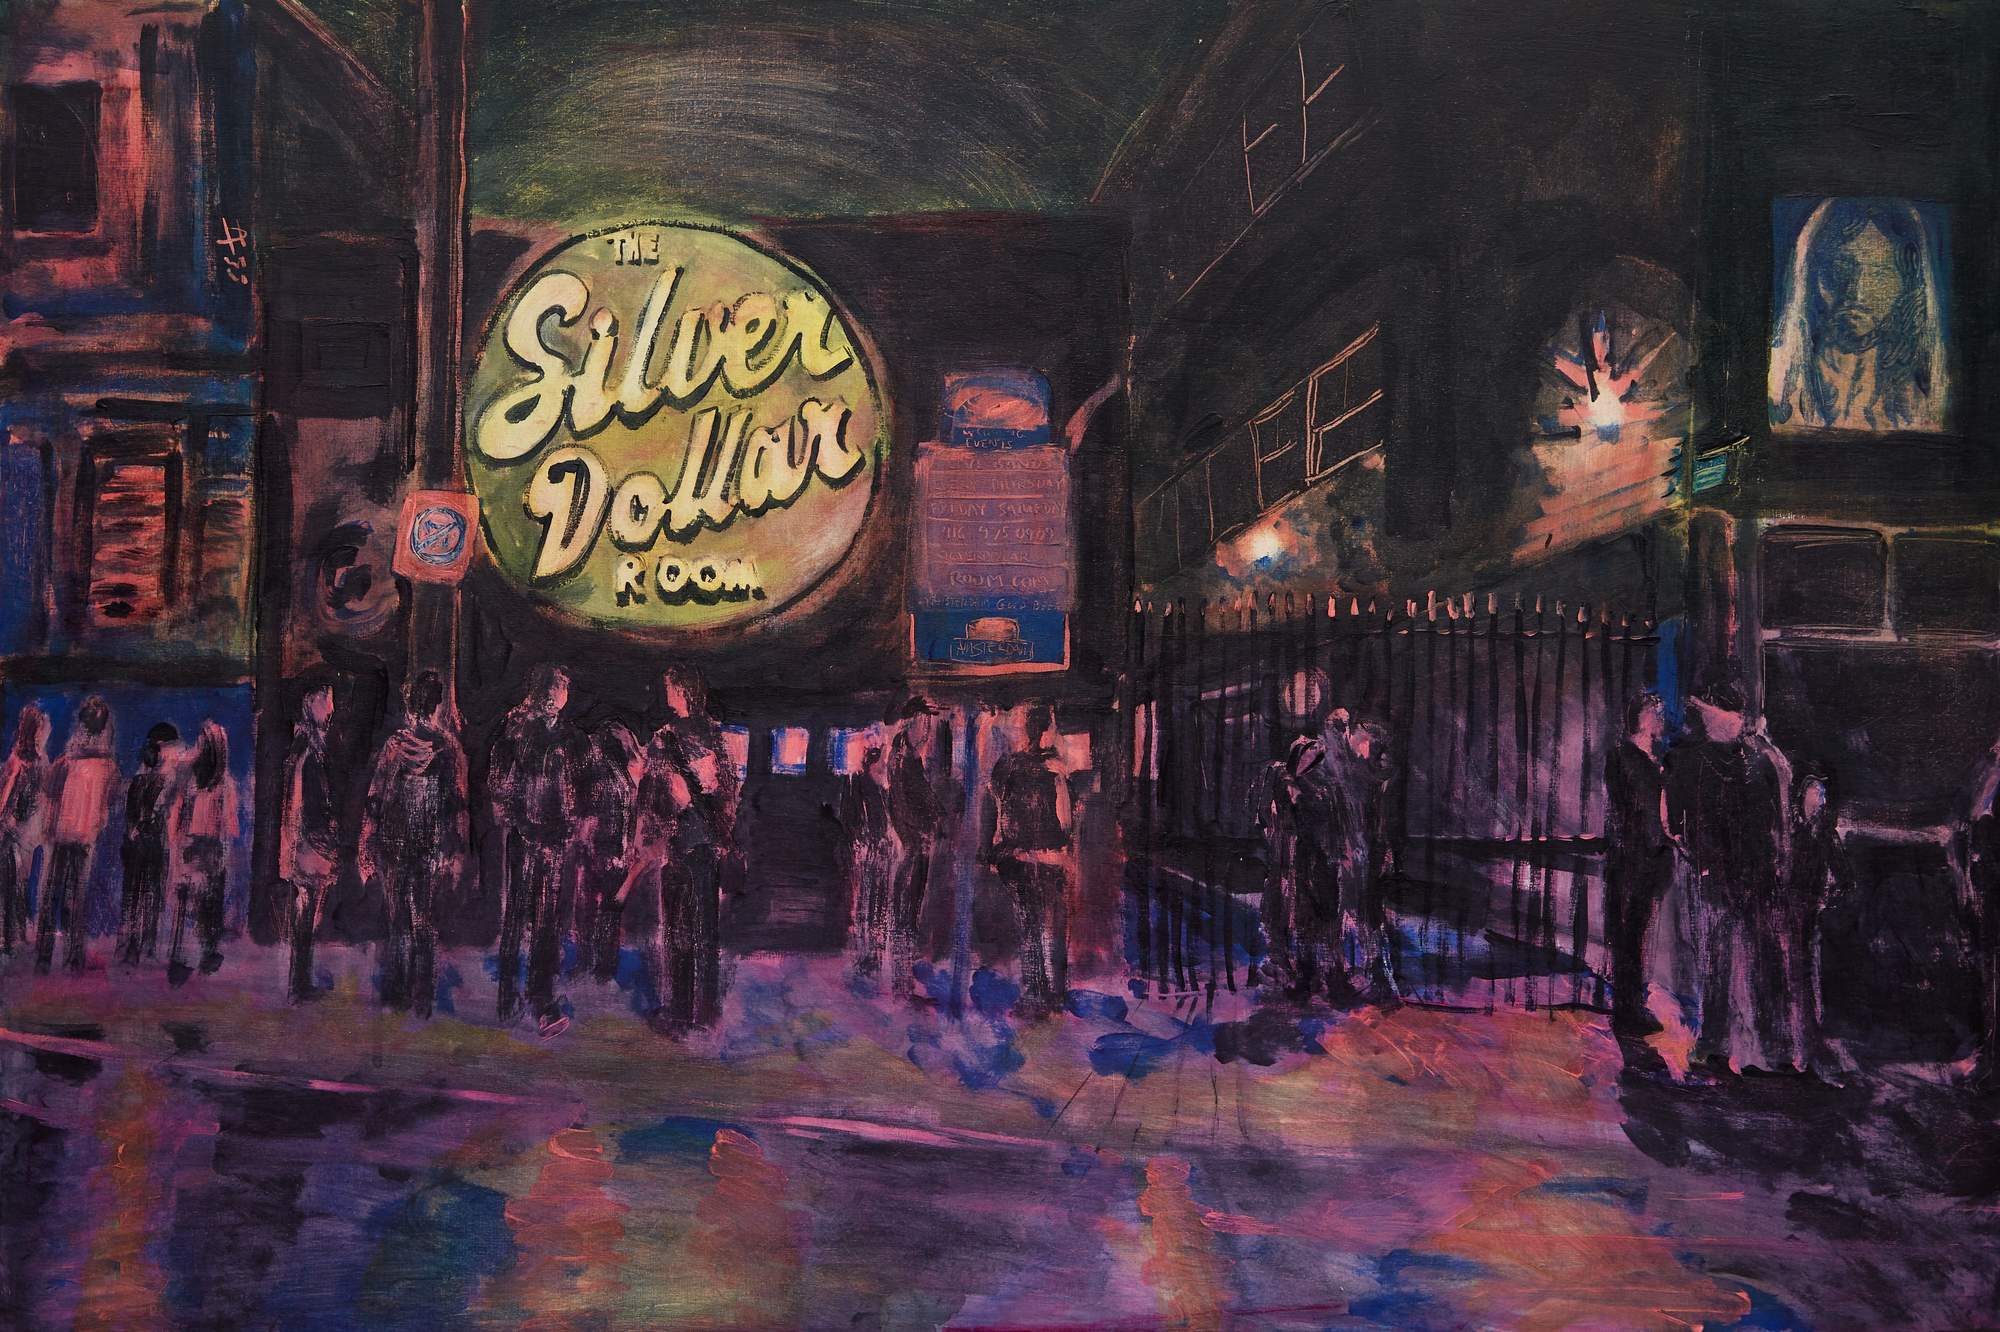 Preview image for The Silver Dollar Room